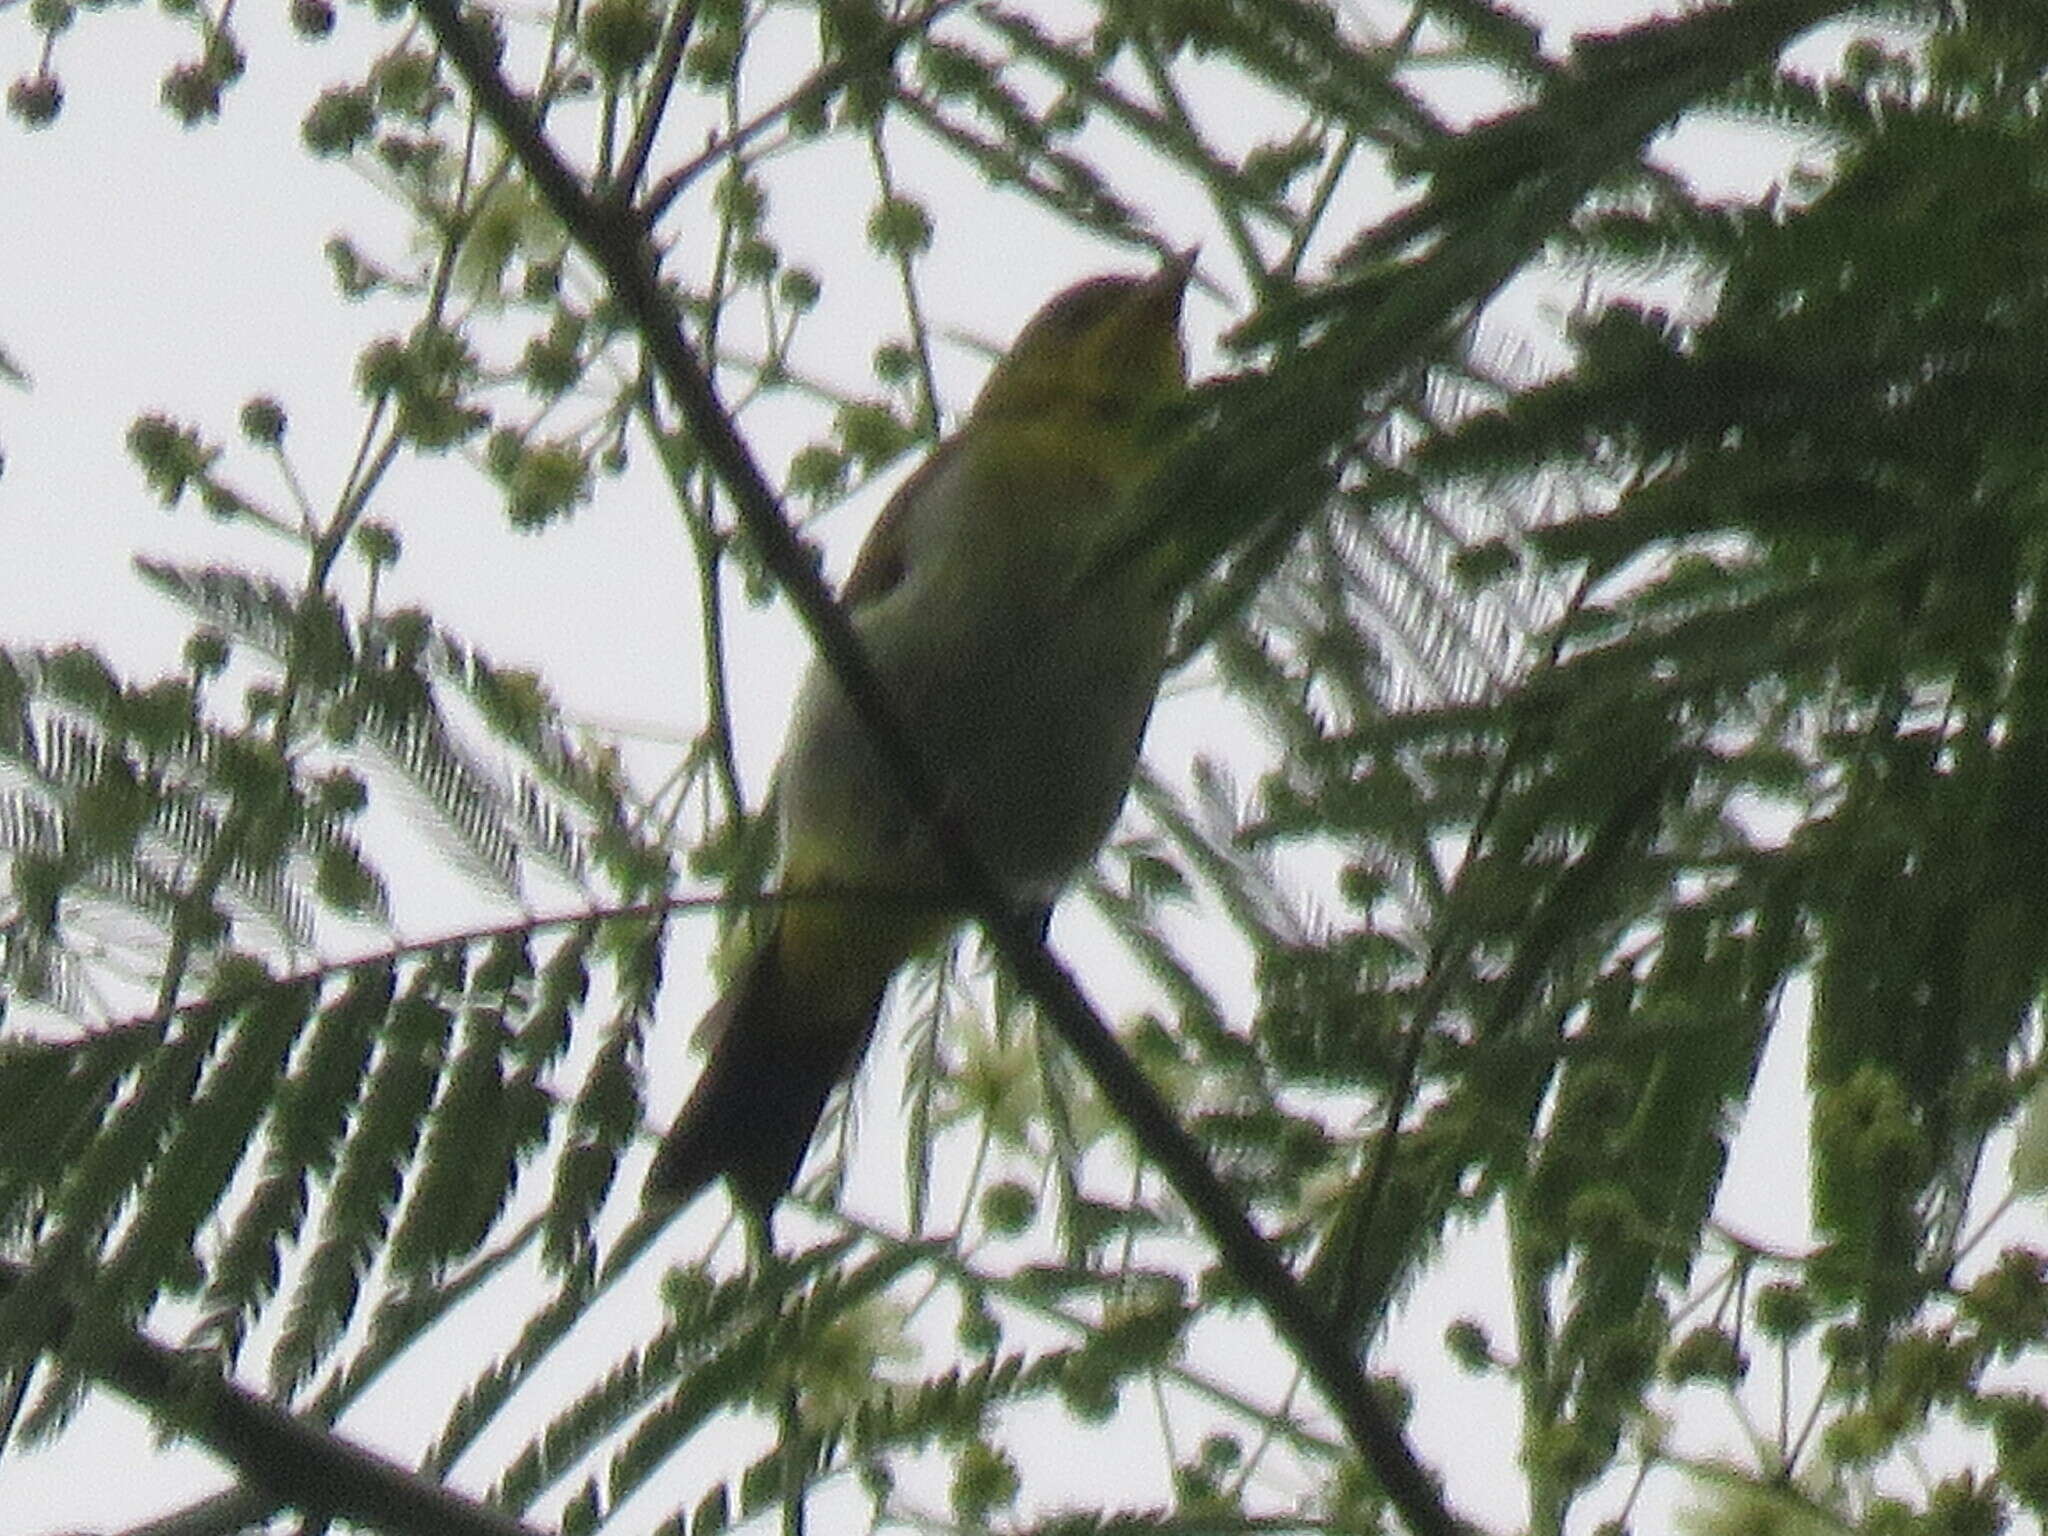 Image of Yellow-backed Tanager